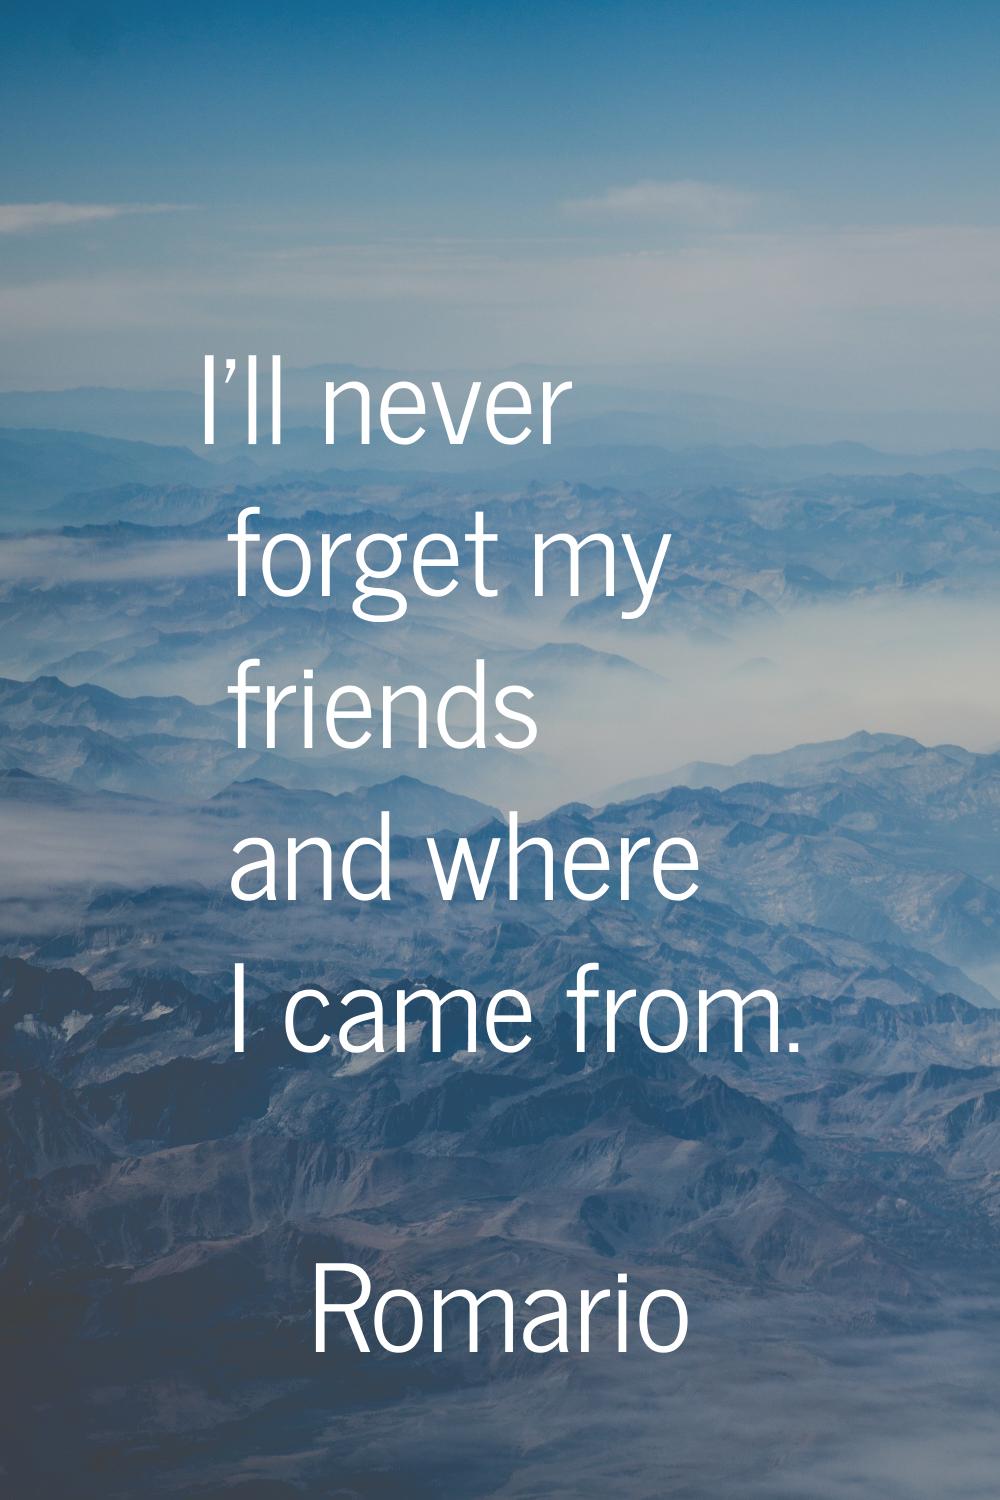 I'll never forget my friends and where I came from.